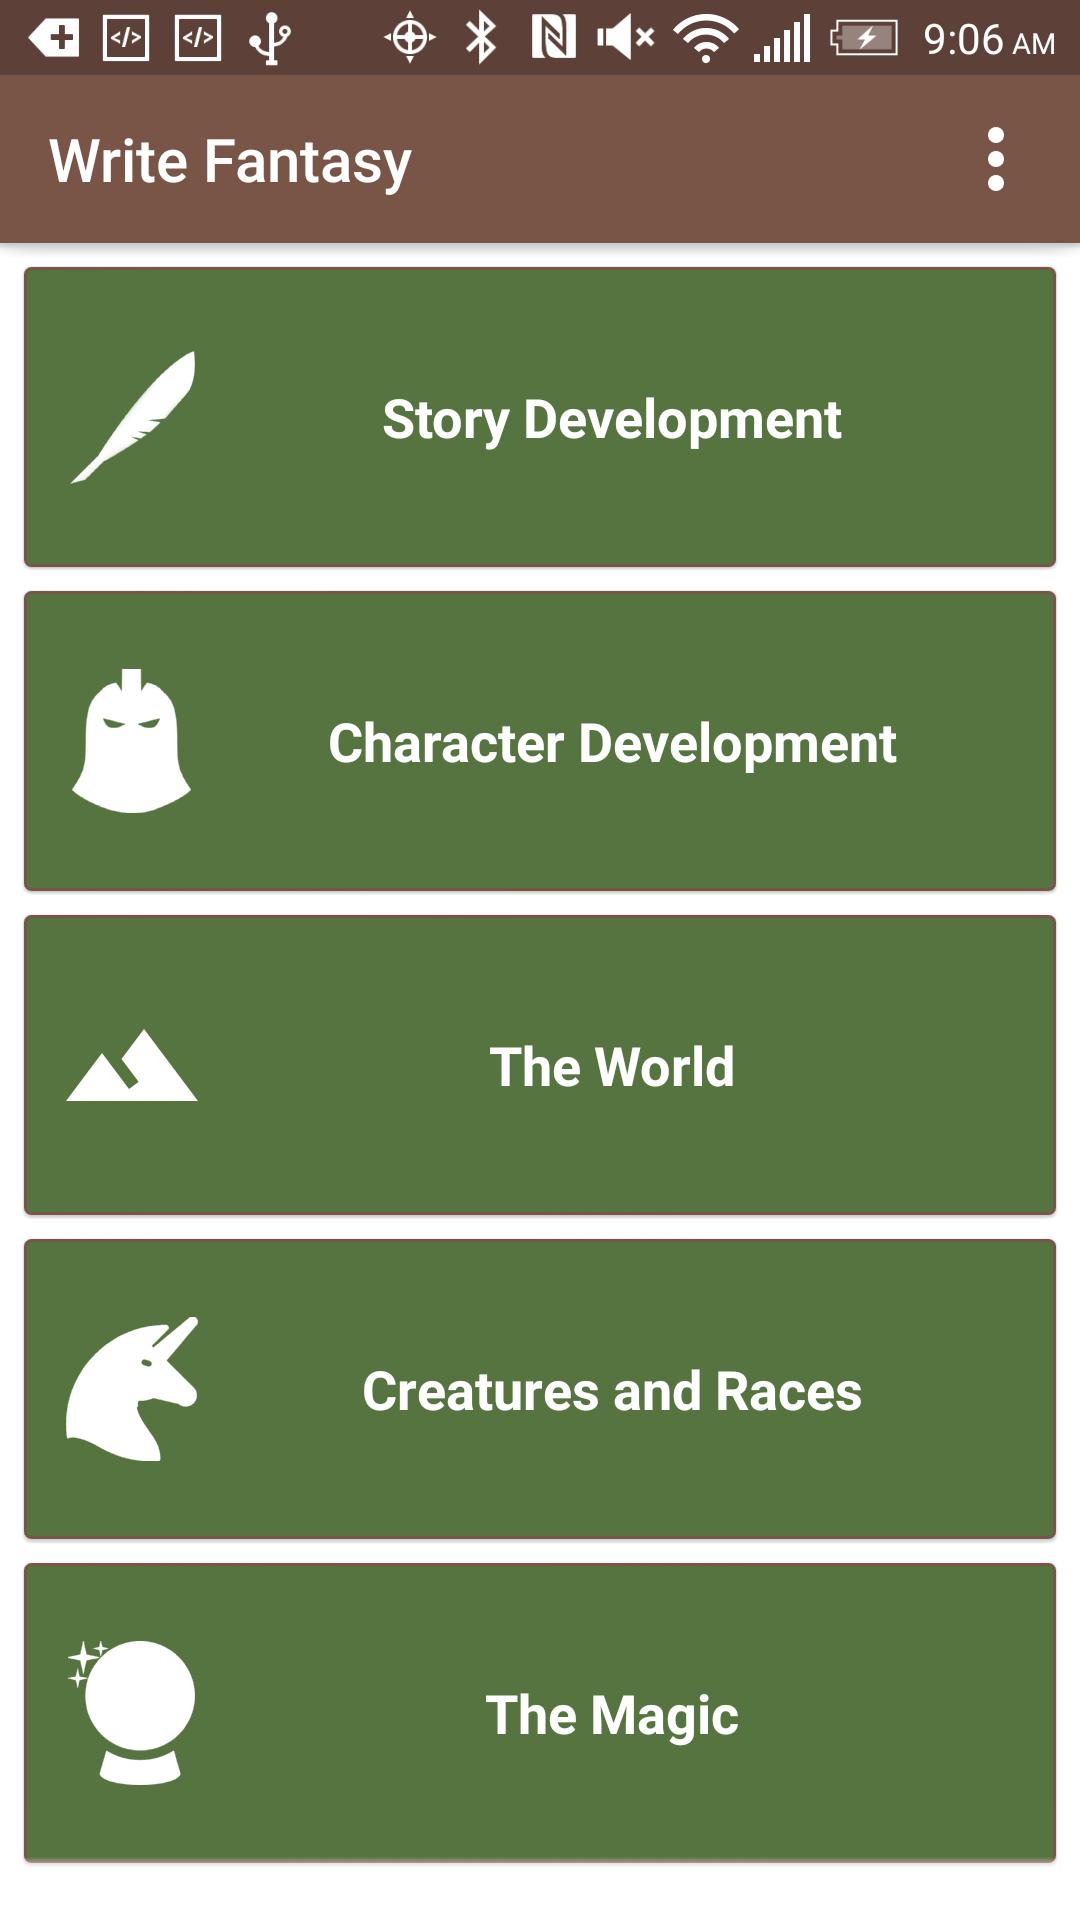 How to Write Fantasy for Android - APK Download